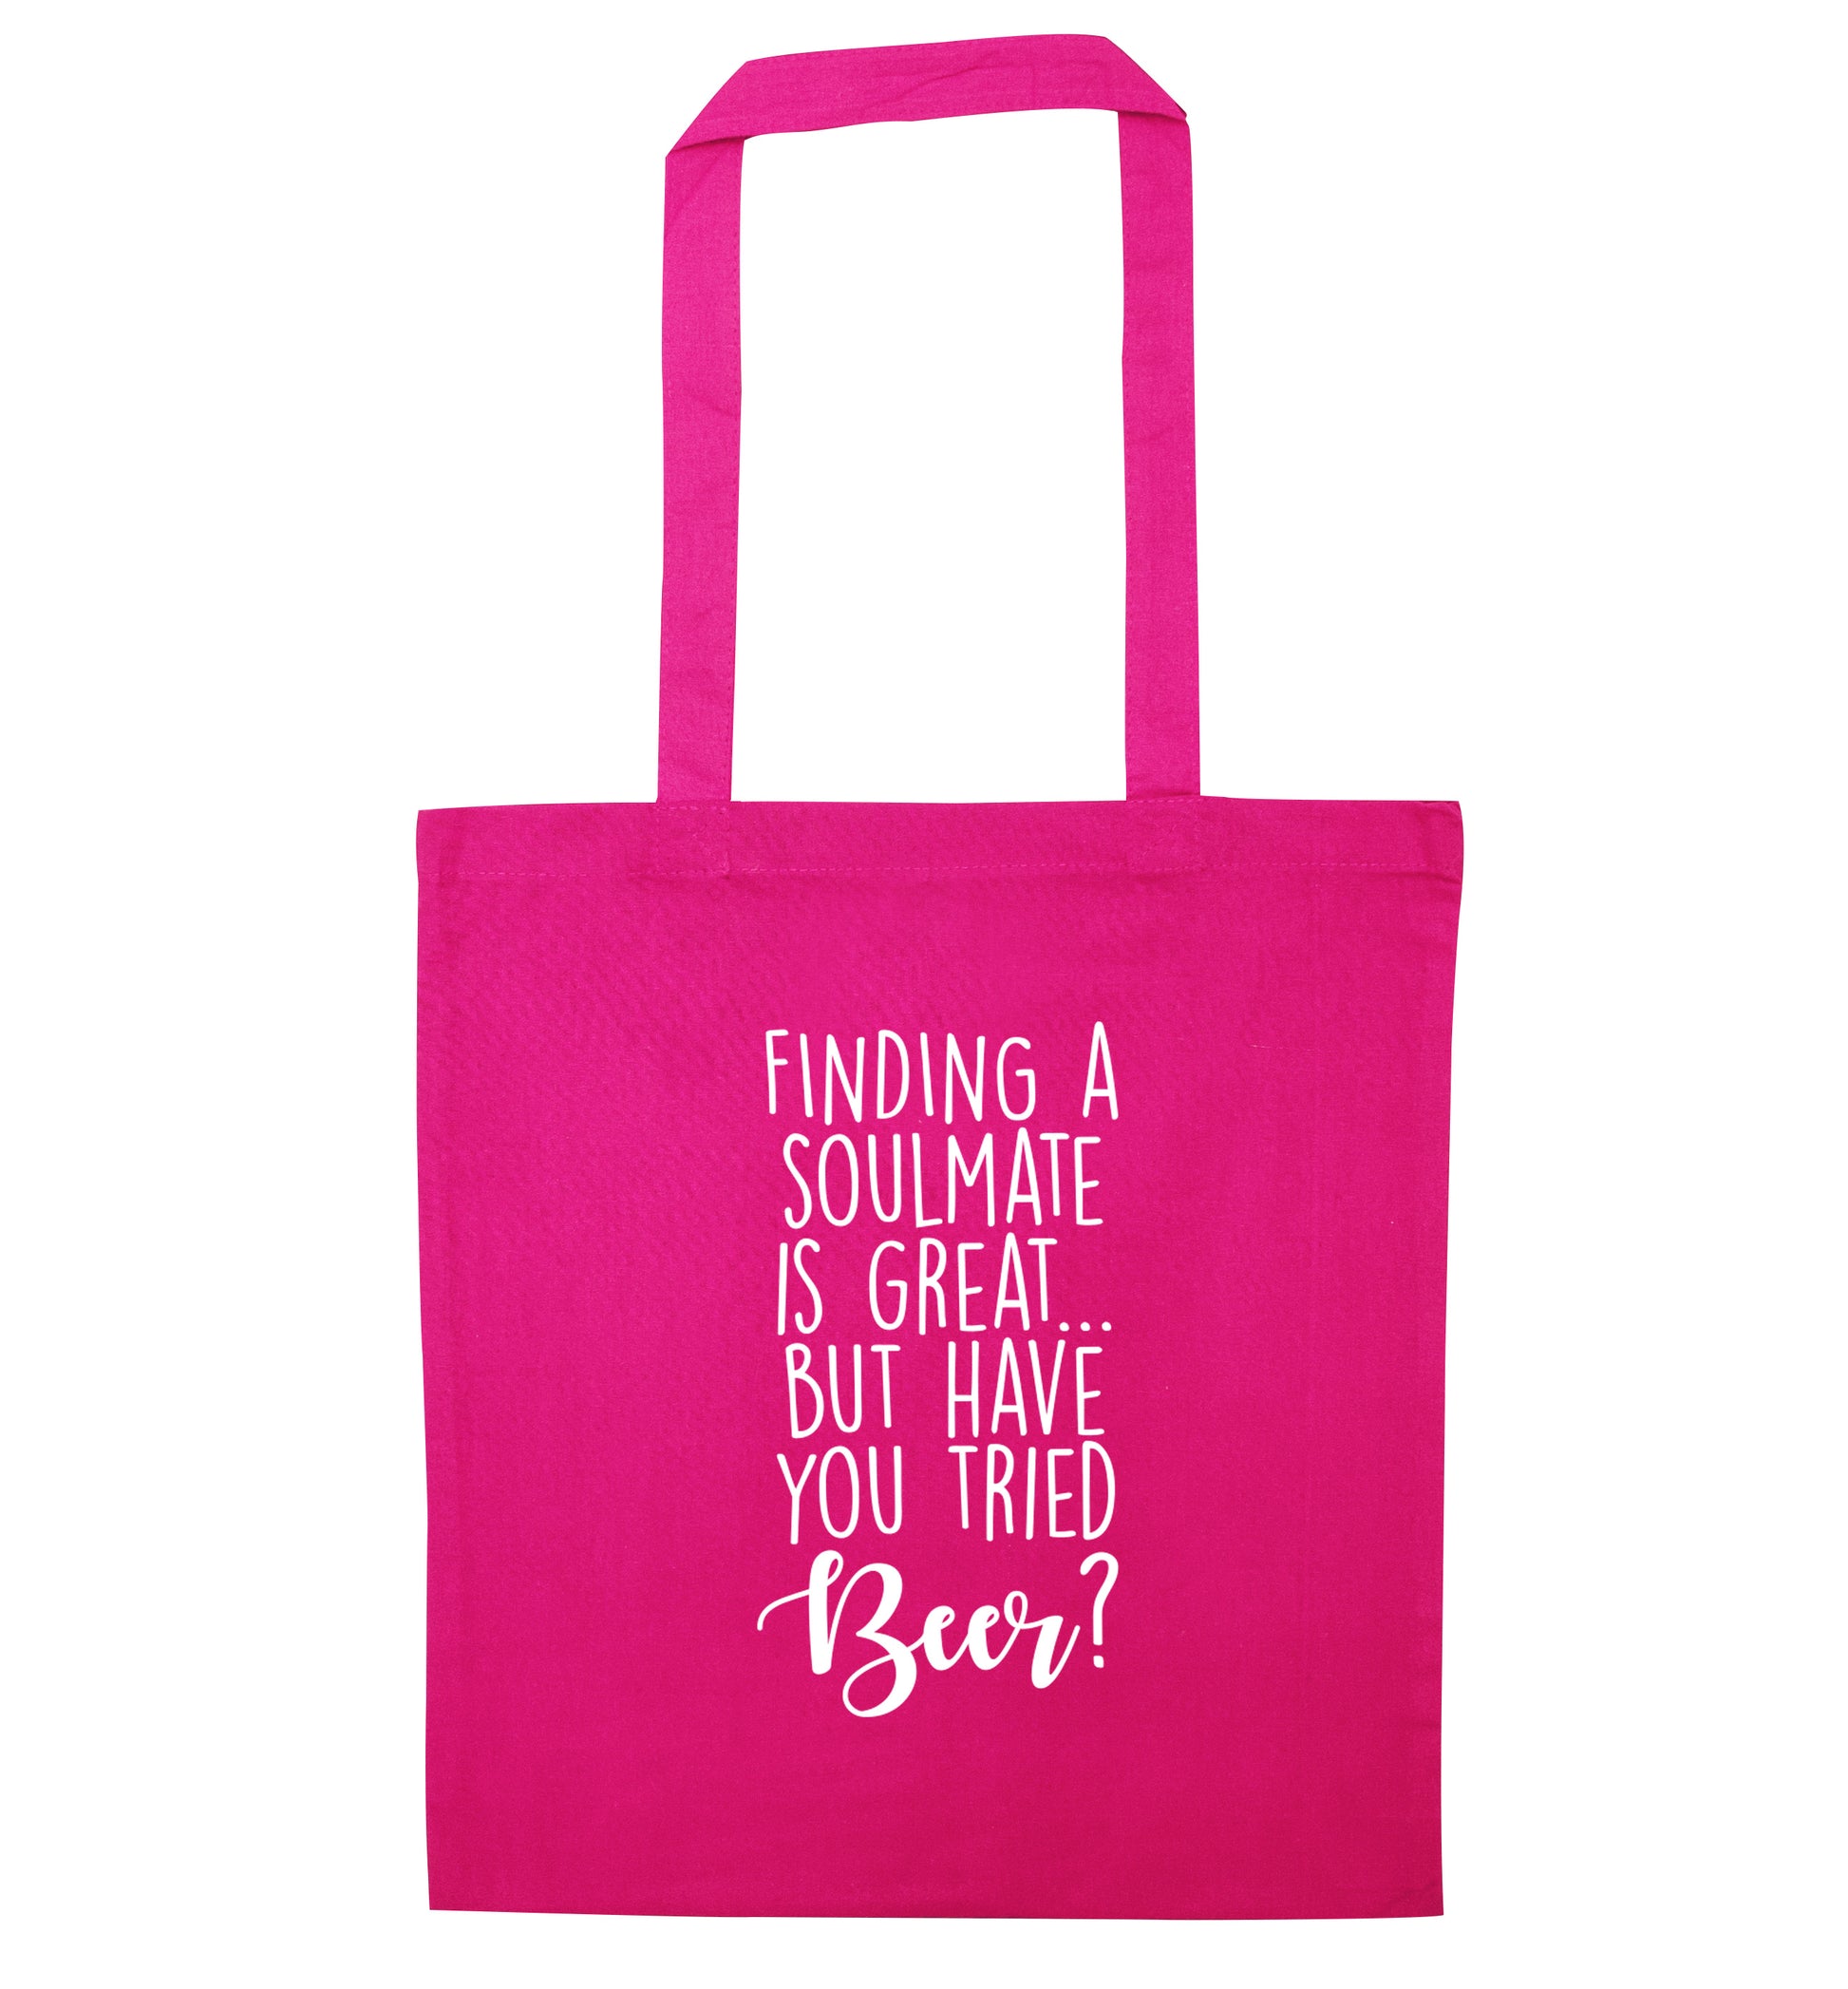 Finding a soulmate is great but have you tried beer? pink tote bag